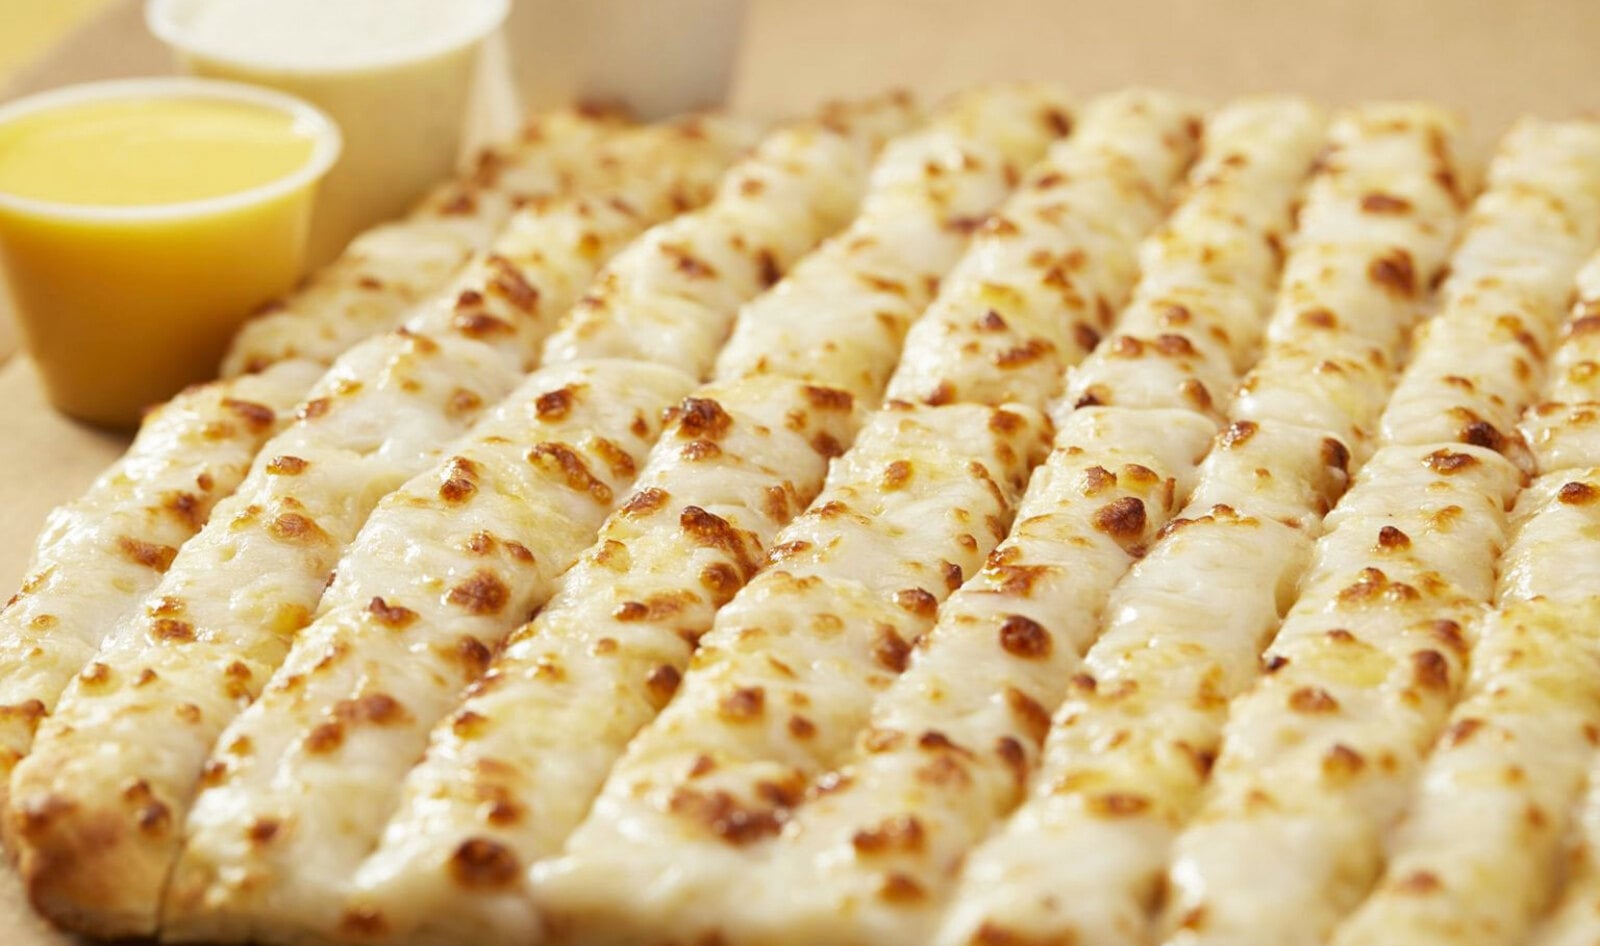 Cheesy Vegan Garlic Bread Sticks Just Launched at 65 Midwest Pizza Shops